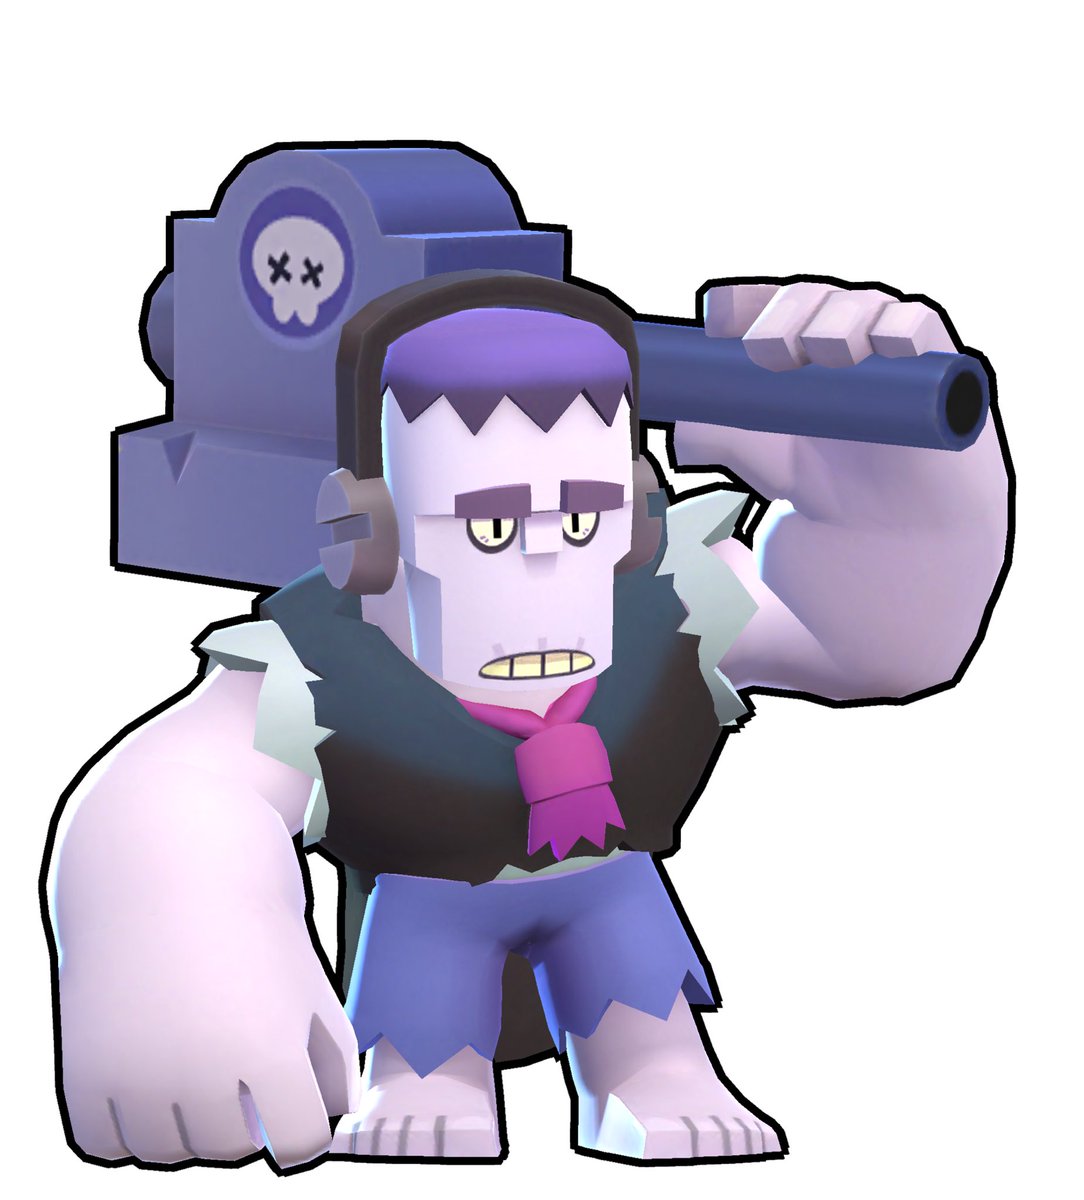 Code Ashbs On Twitter After The Balance Changes And After Much Consideration I Believe The Worst Overall Brawler In The Game Right Now Is Frank He S Not A Bad Brawler And Sometimes - come trovare frank brawl stars